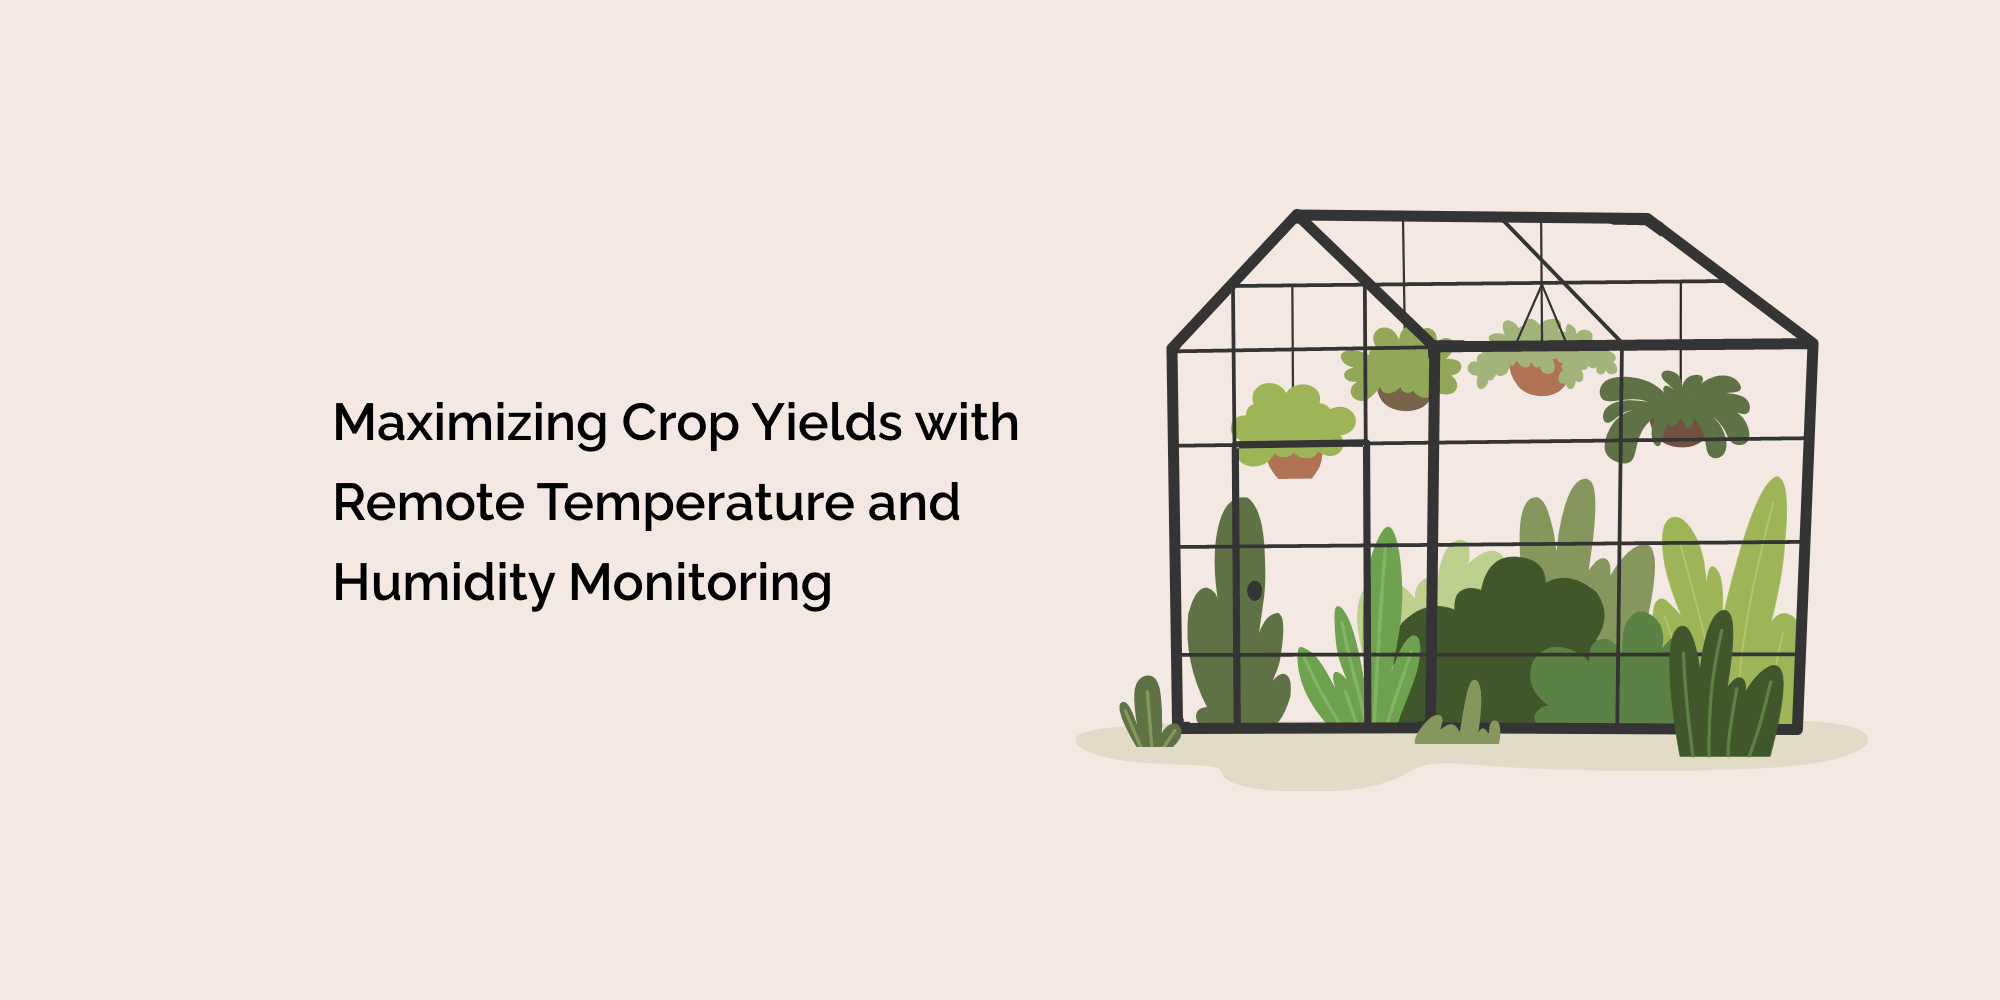 Maximizing Crop Yields with Remote Temperature and Humidity Monitoring